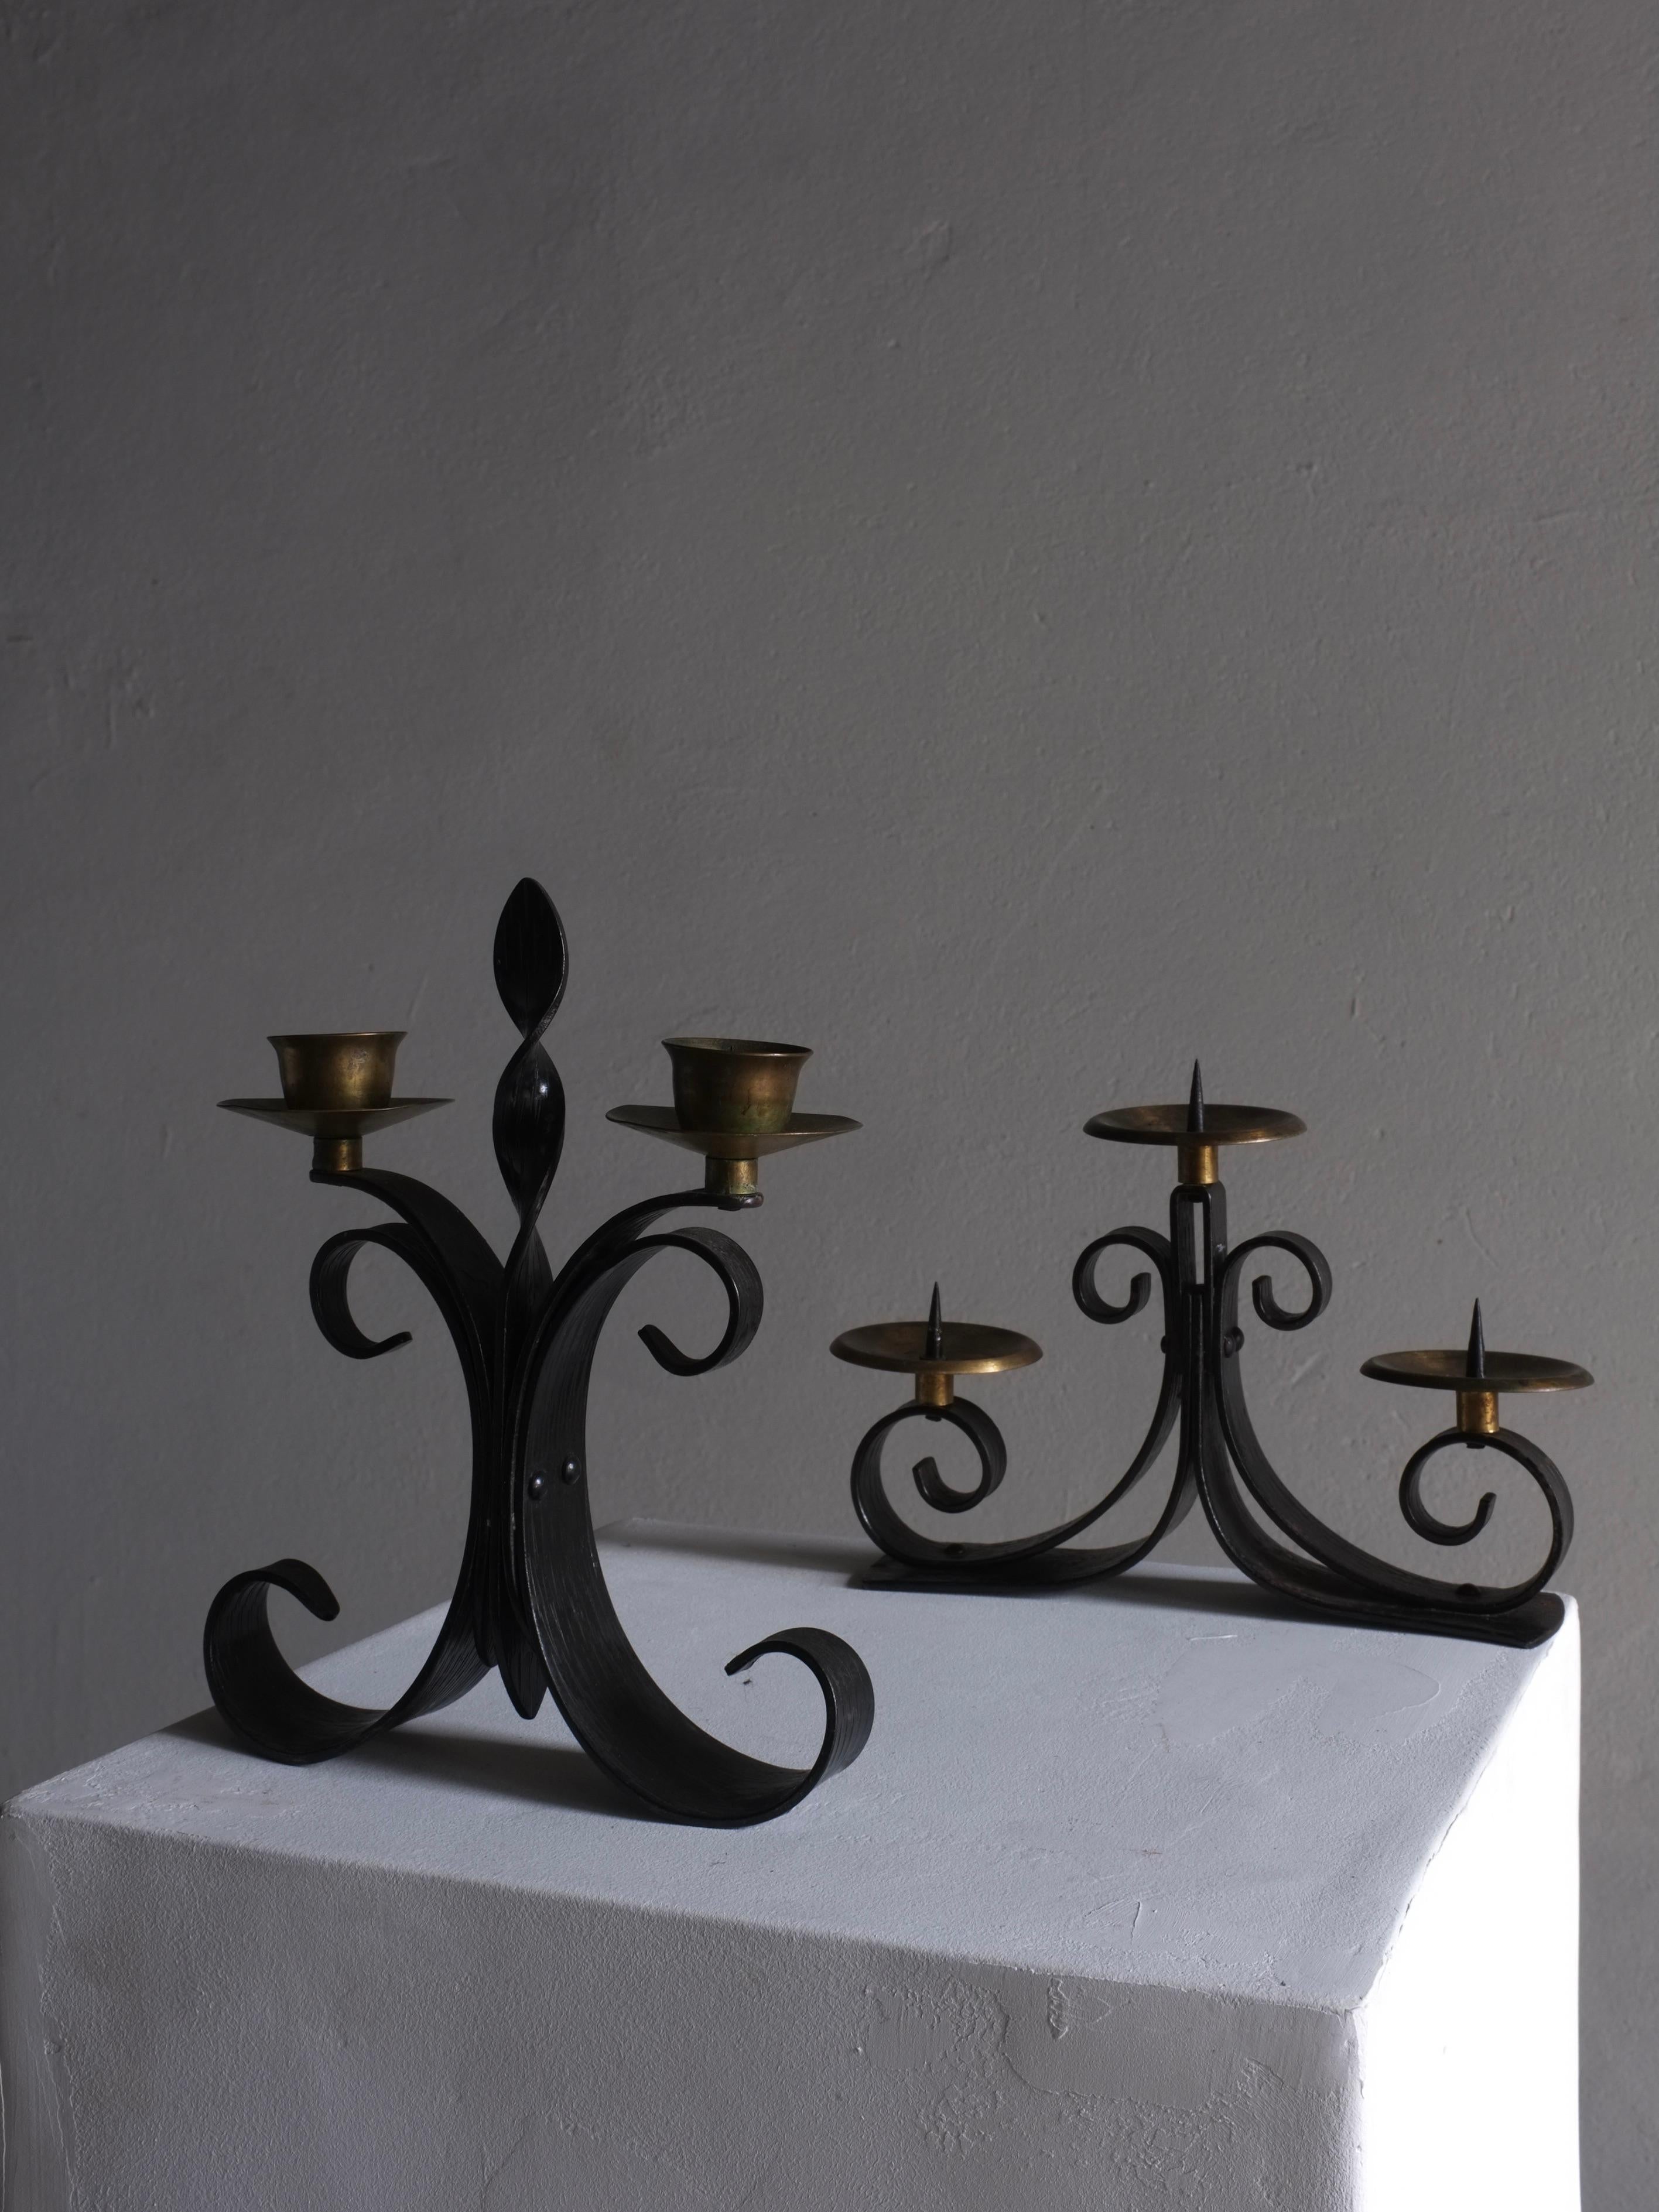 Set of two vintage brutalist metal candle holders with three and two arms. Black iron base, brass cups.

Additional information:
Country of manufacture: Latvia
Period: 1970s 
Dimensions: W 17.5 cm W 21.5 cm x D 5.5 cm, Cup Diameter 6.5 cm D 4 cm,